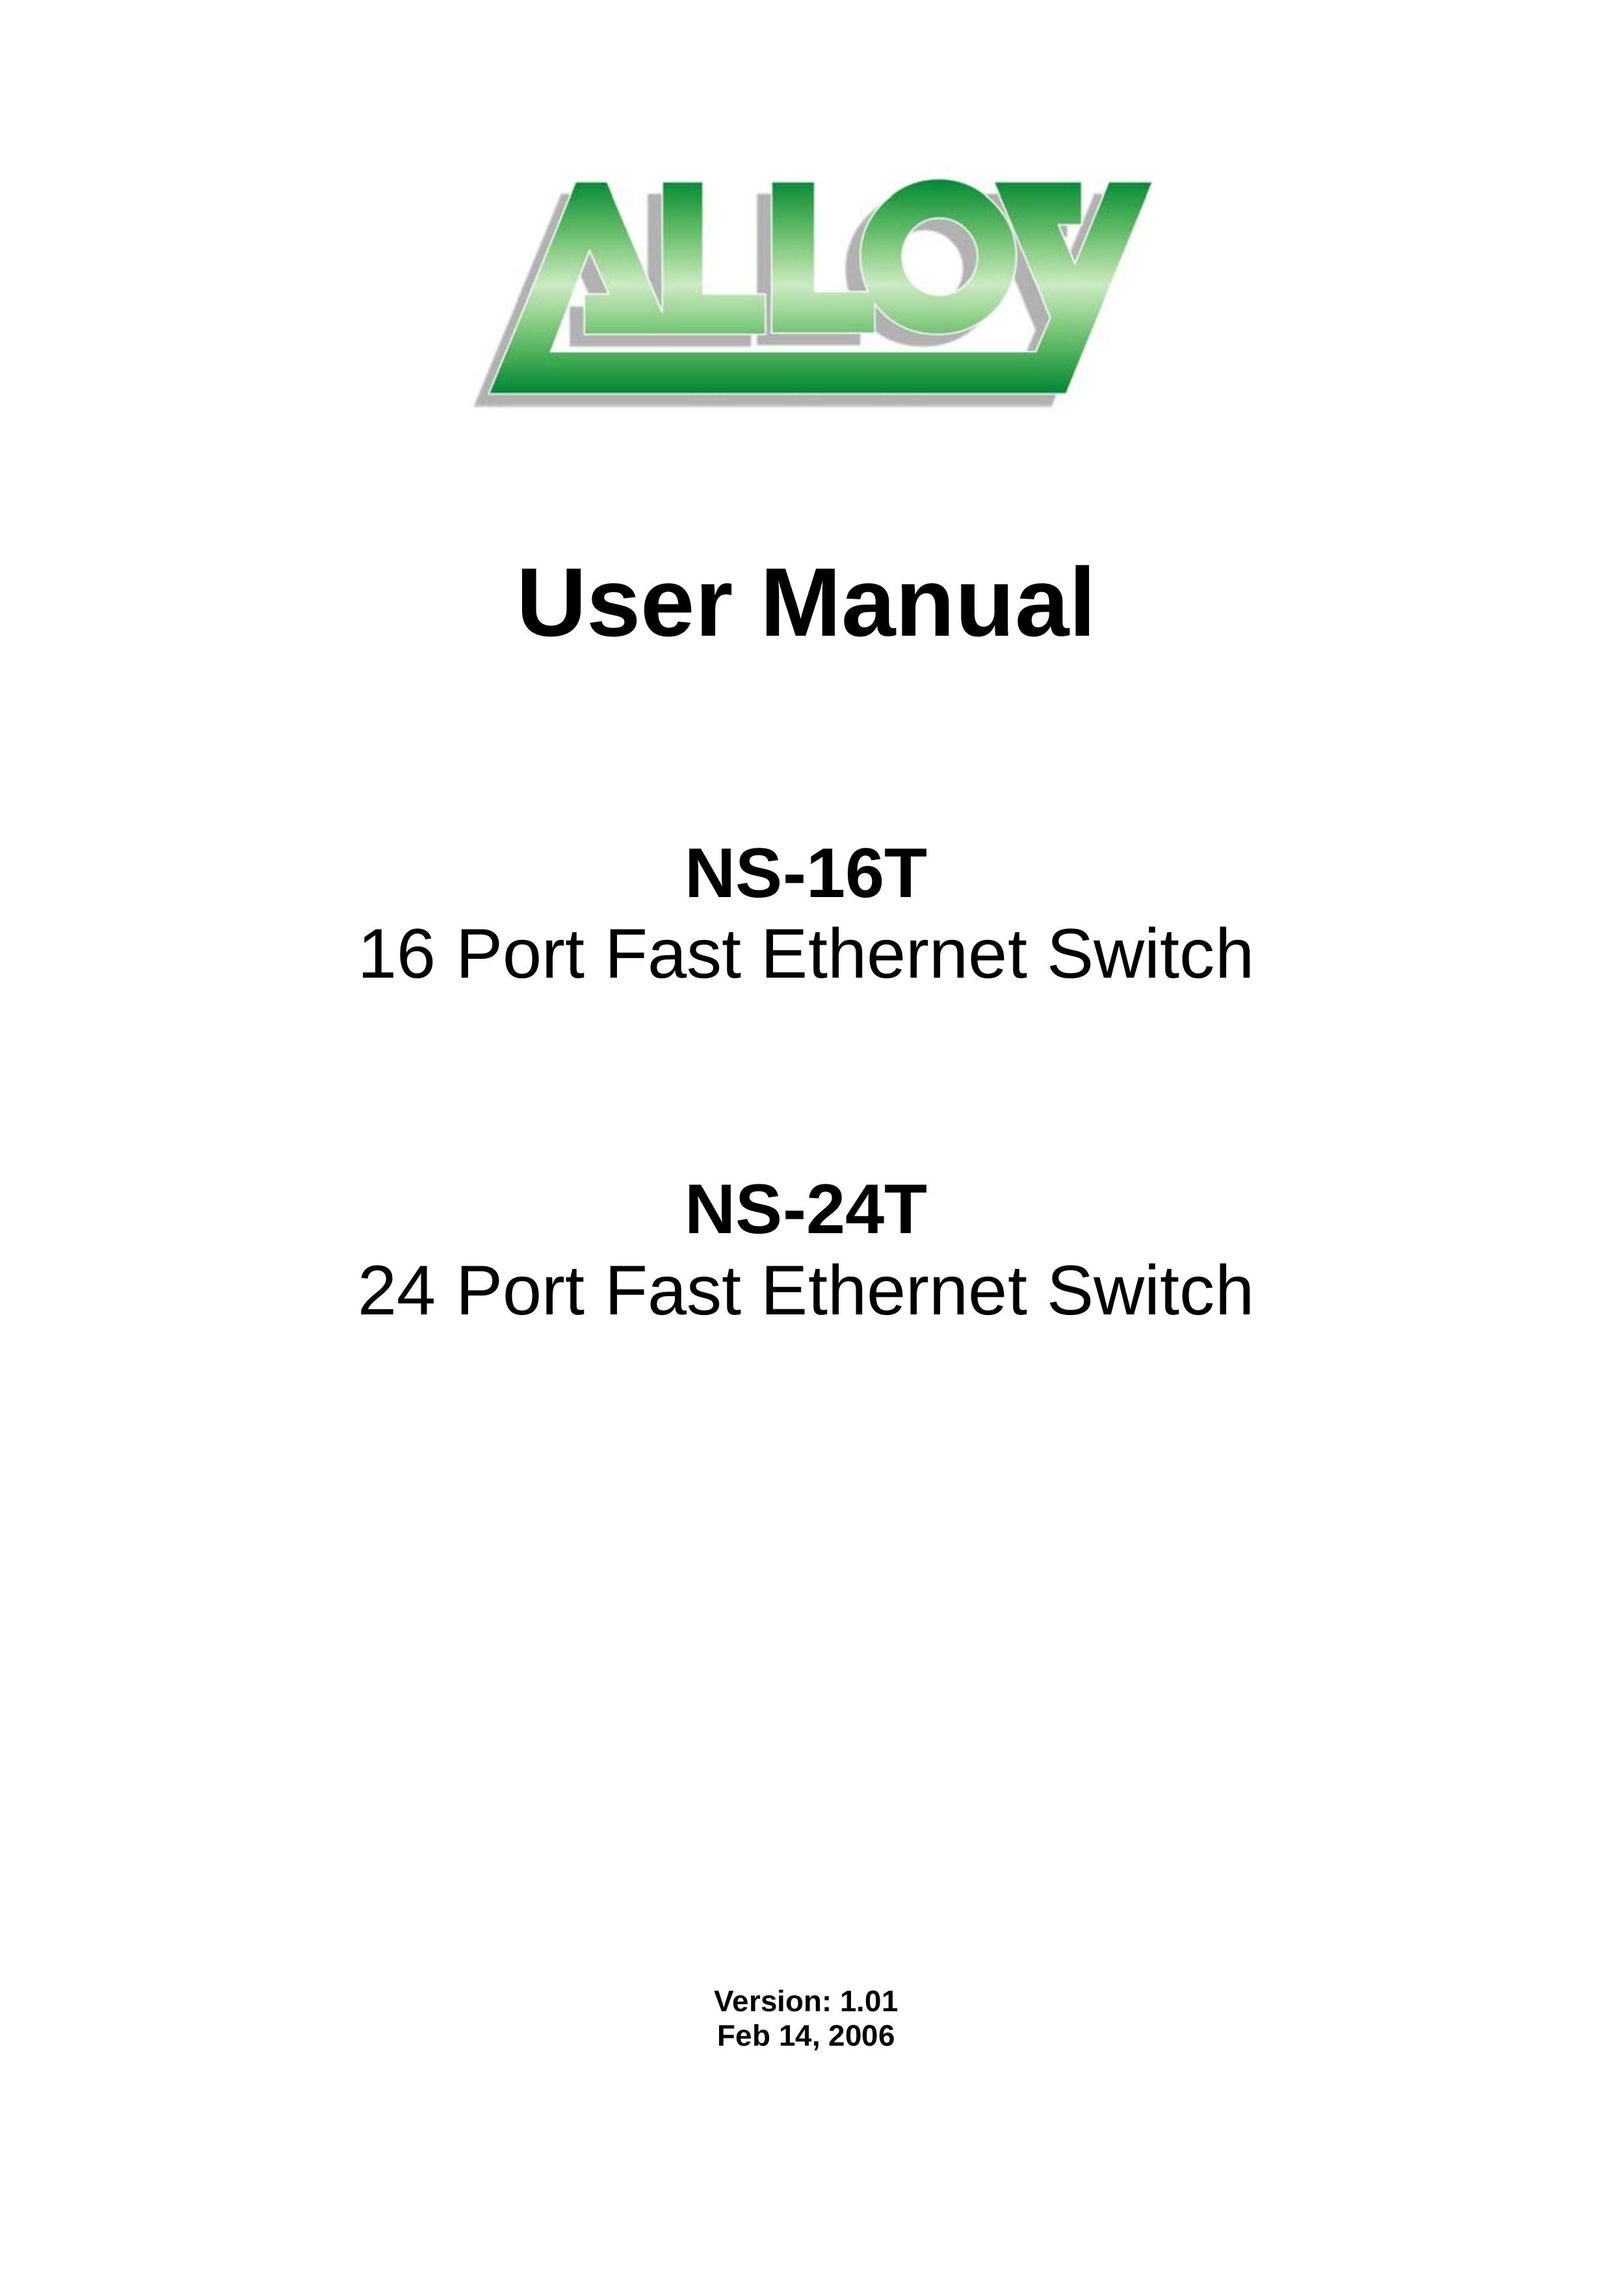 Alloy Computer Products NS-16T Switch User Manual